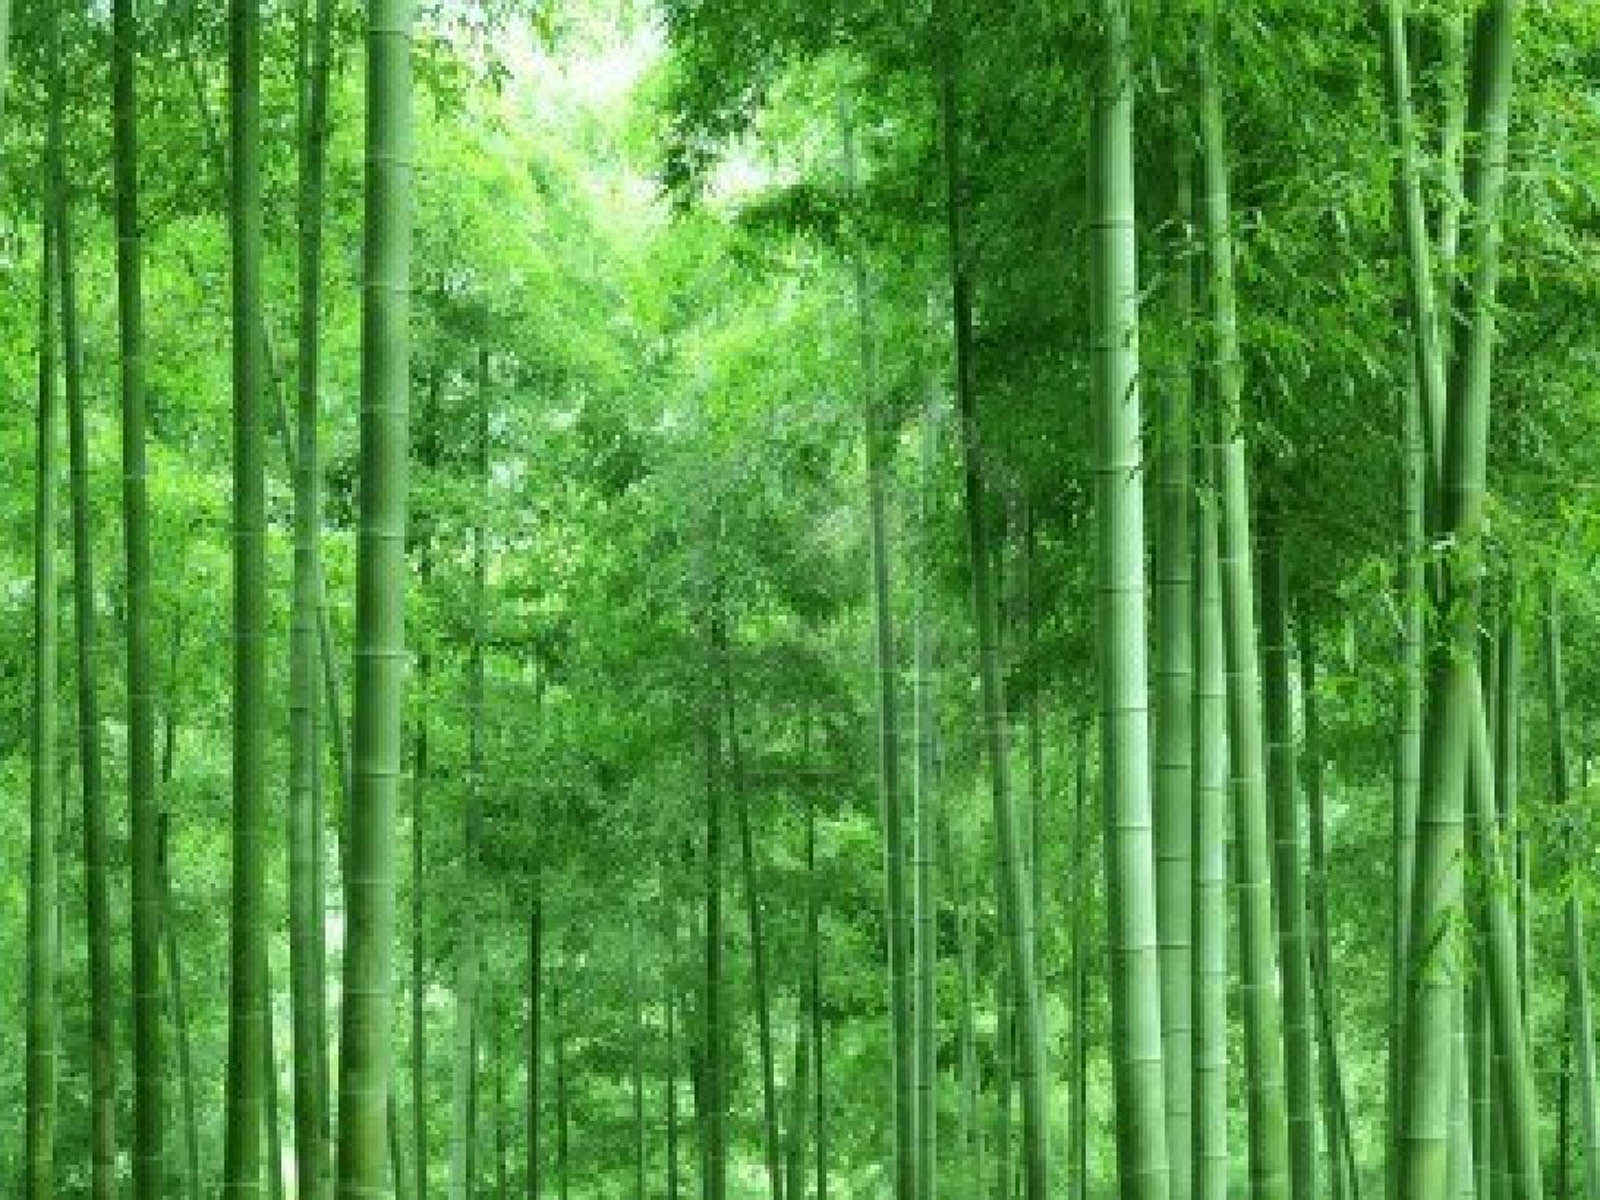  HD  Wallpapers bamboo tree hd  wallpapers